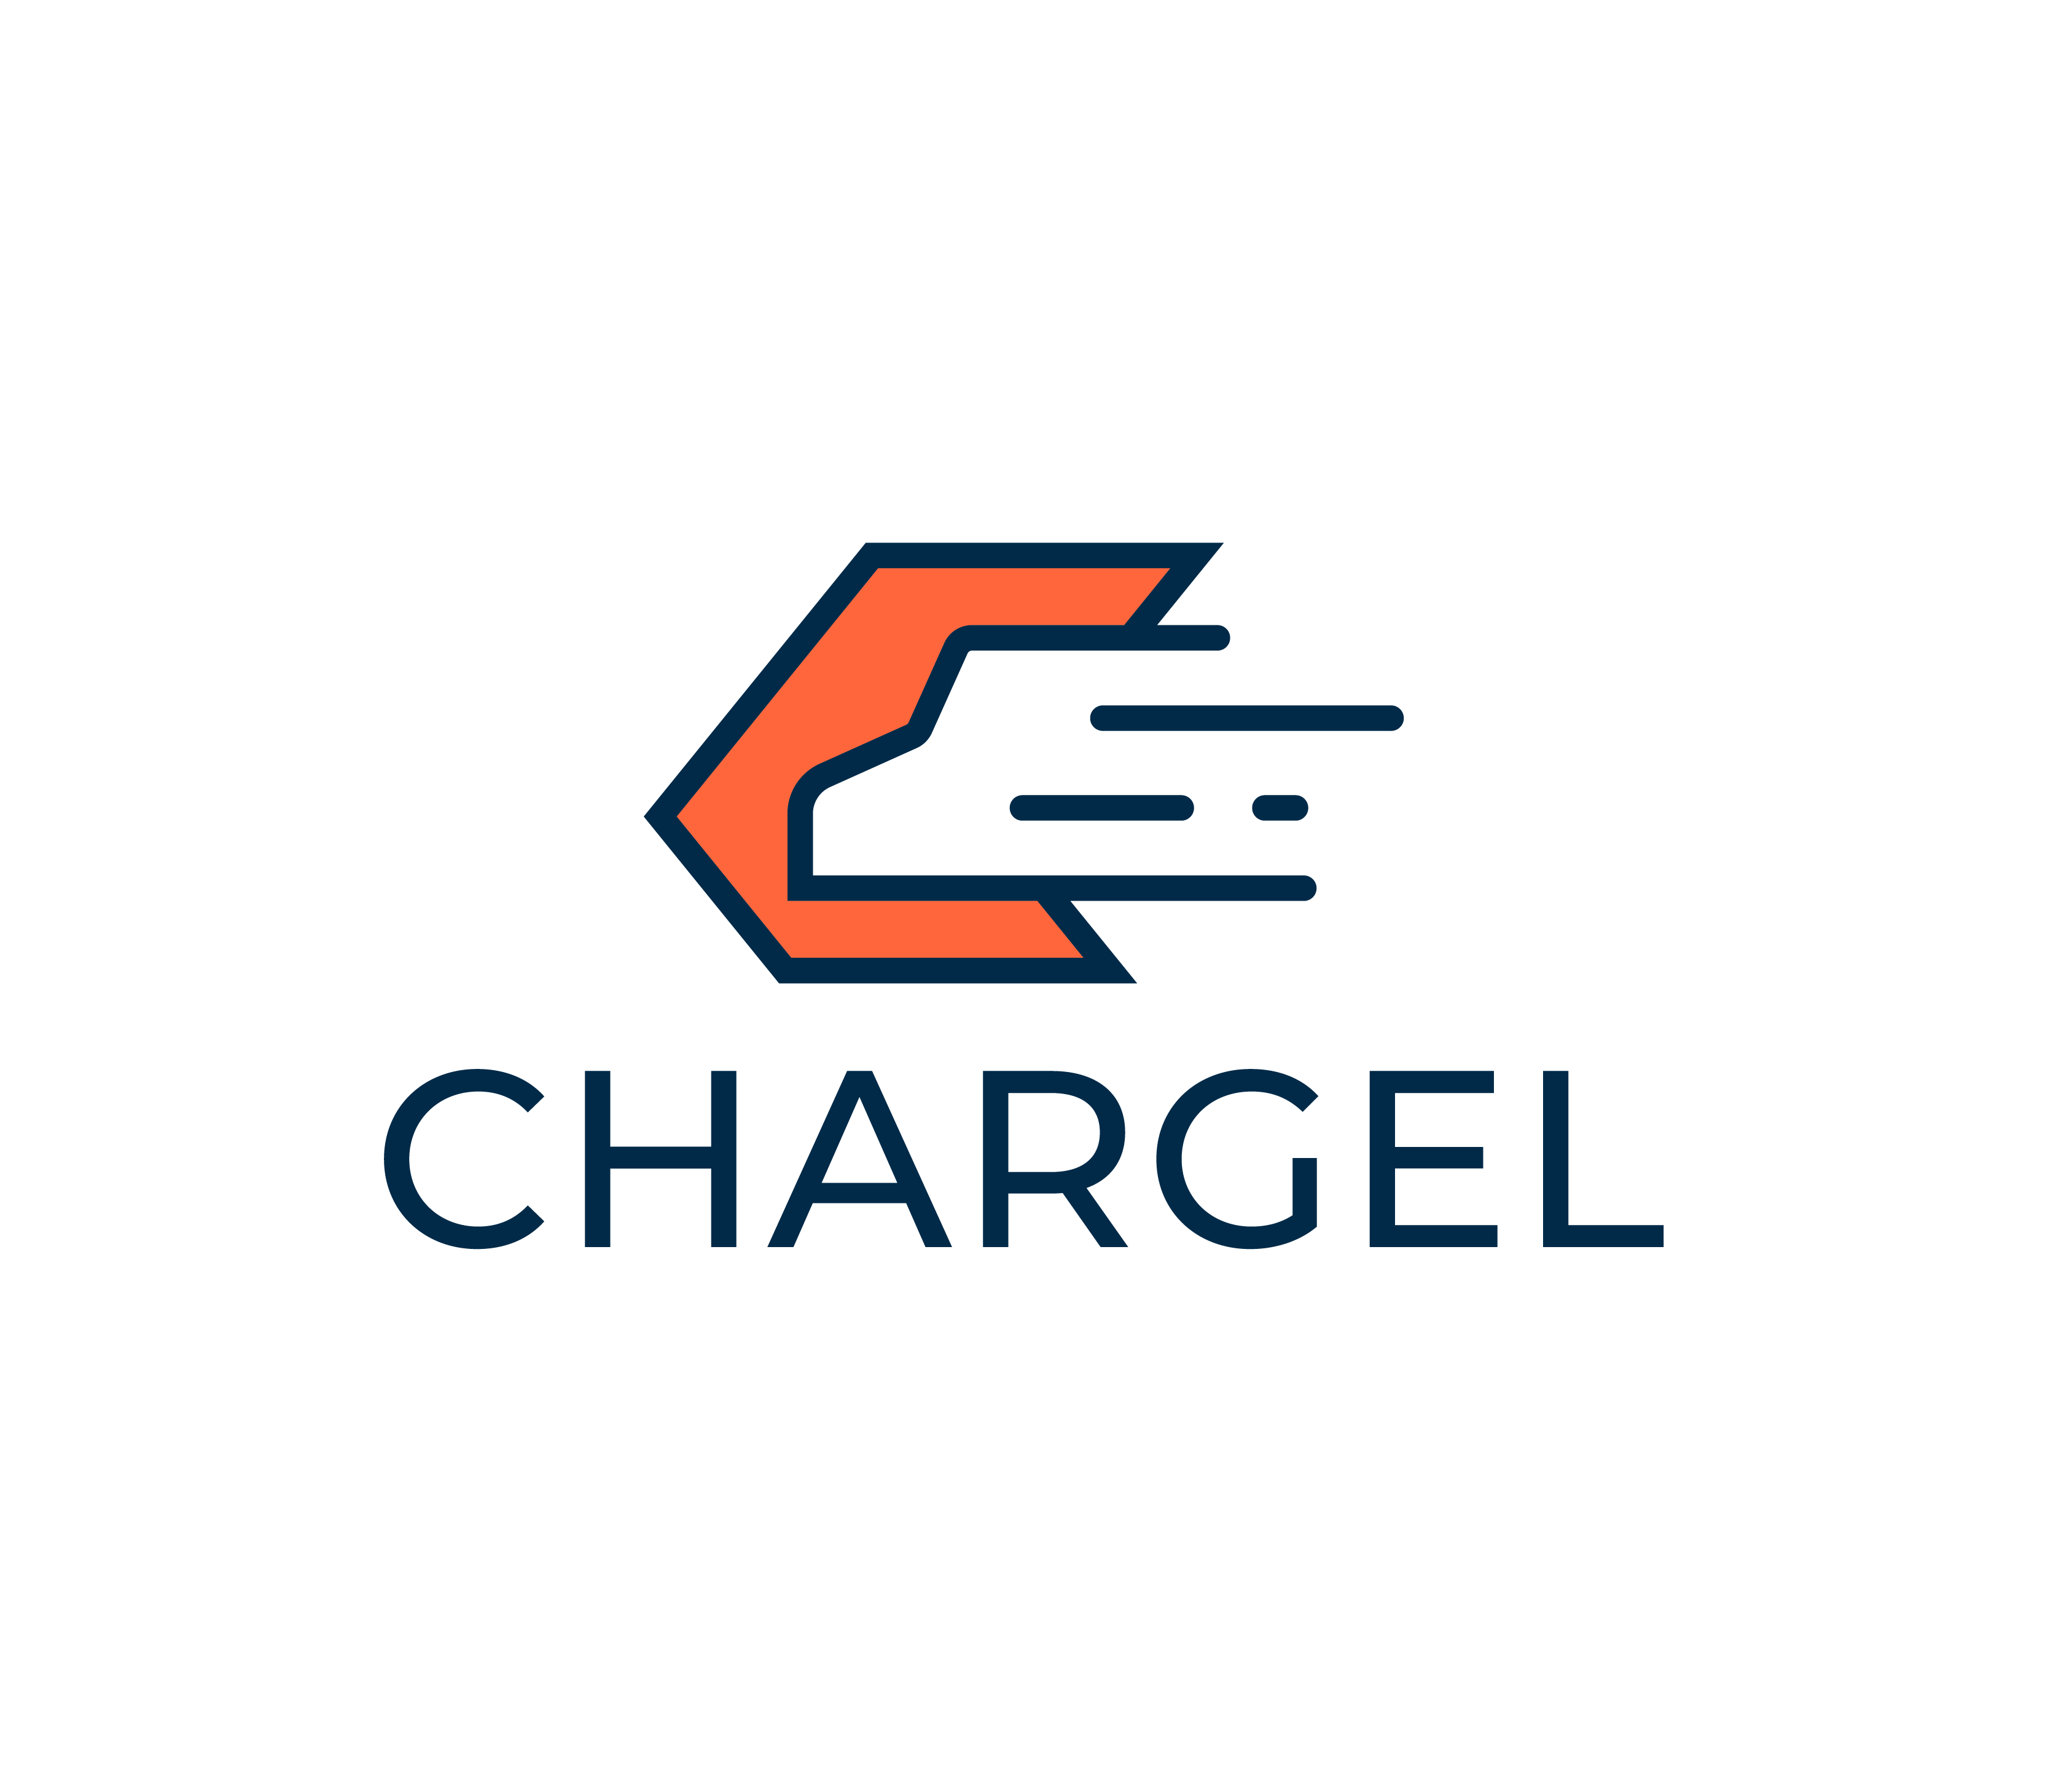 CHARGEL